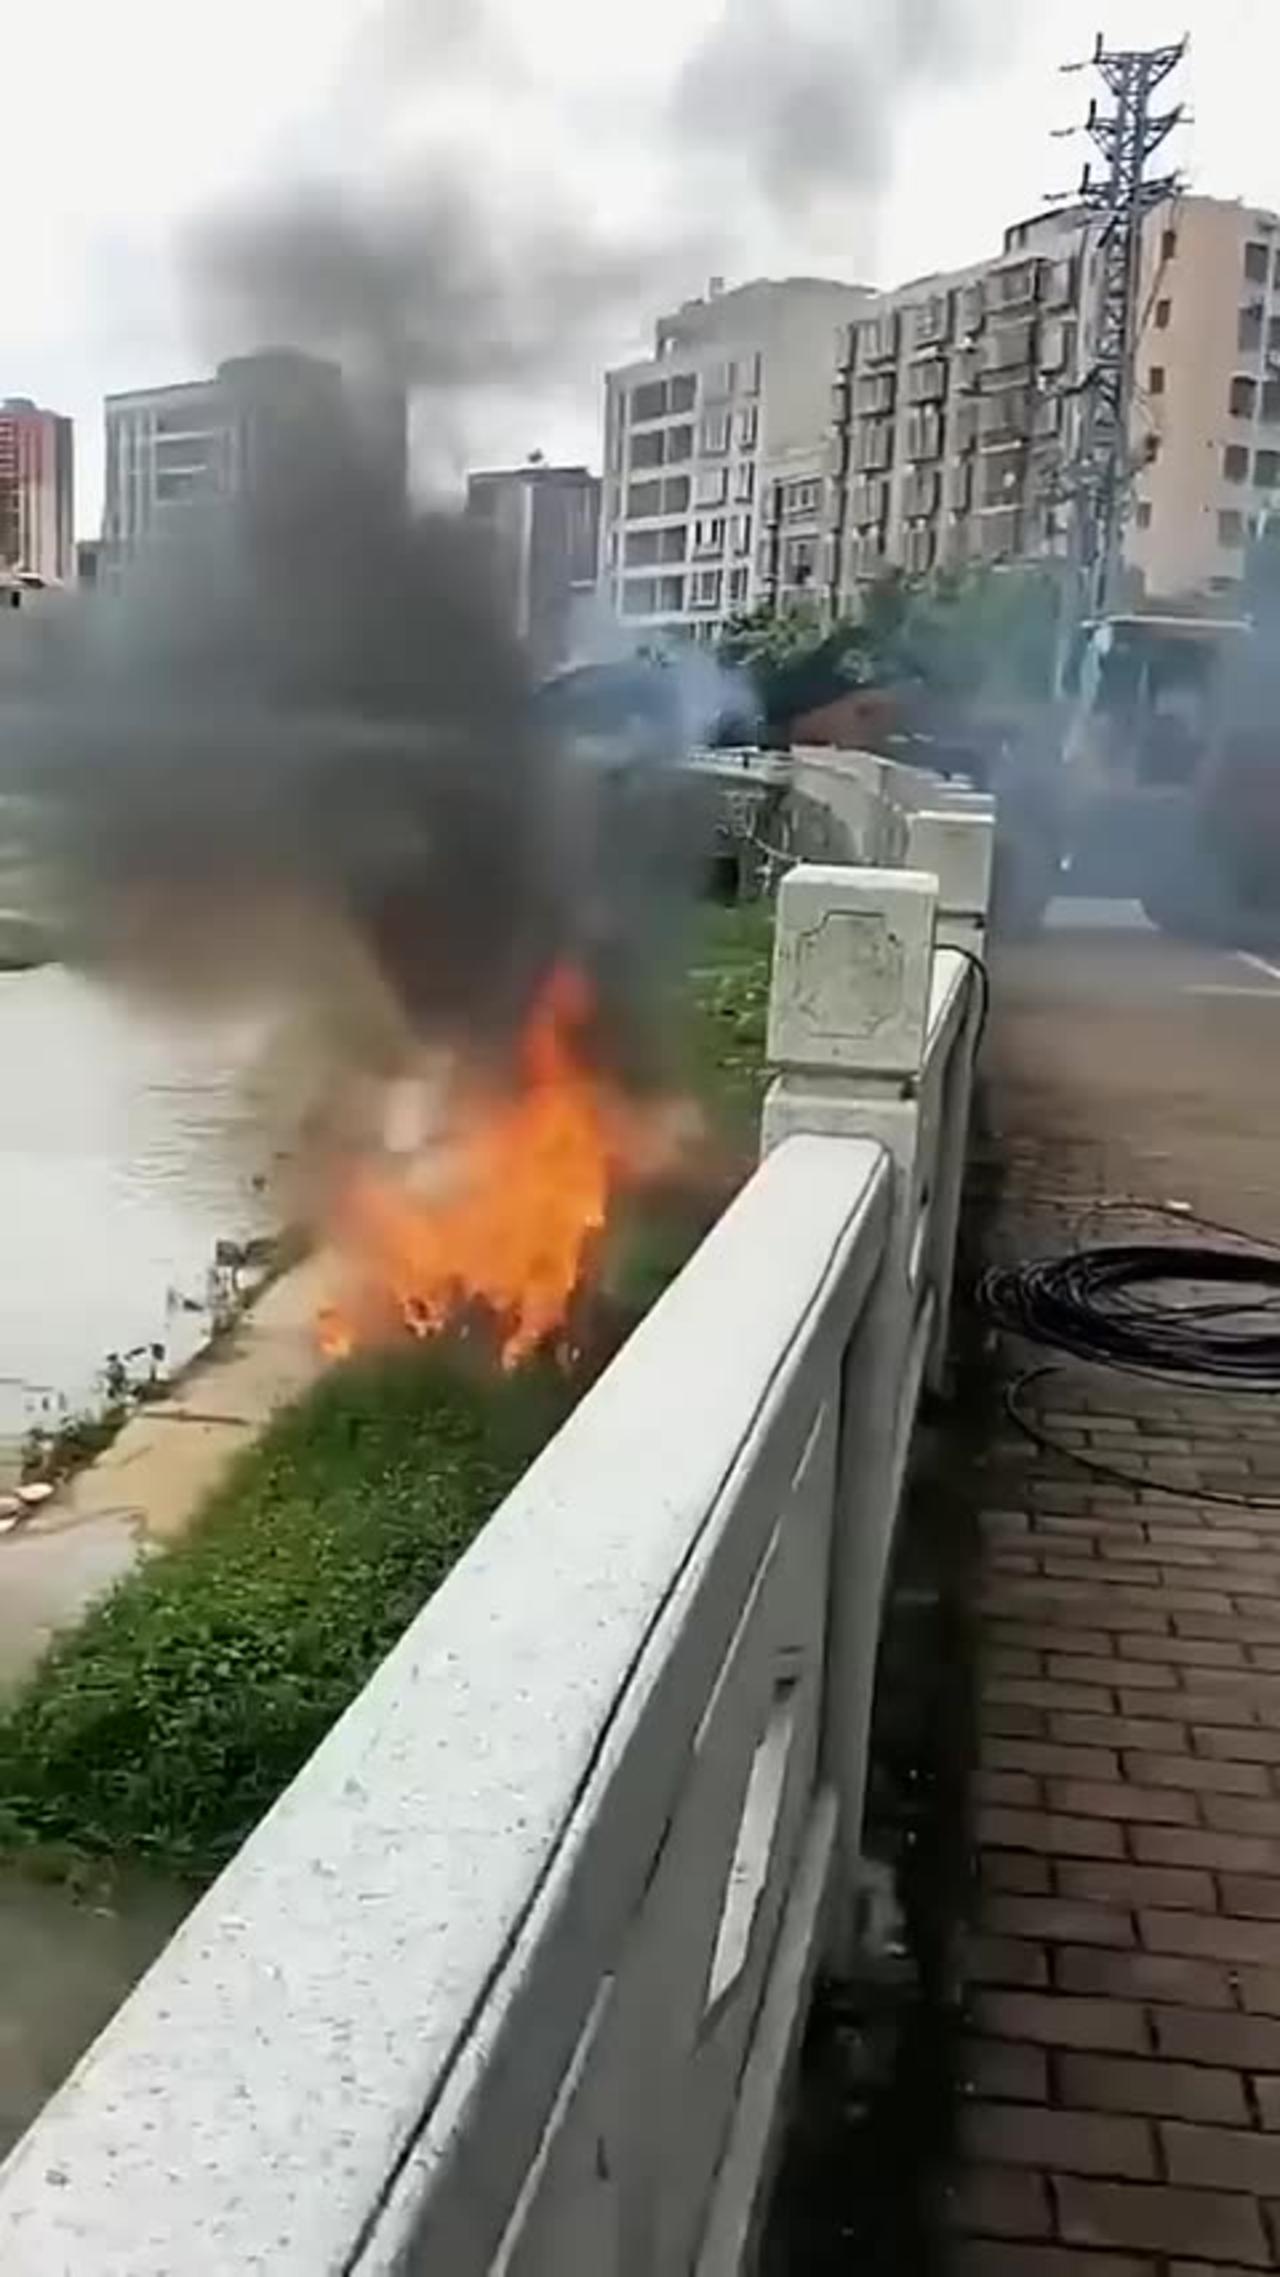 Electric car catches fire